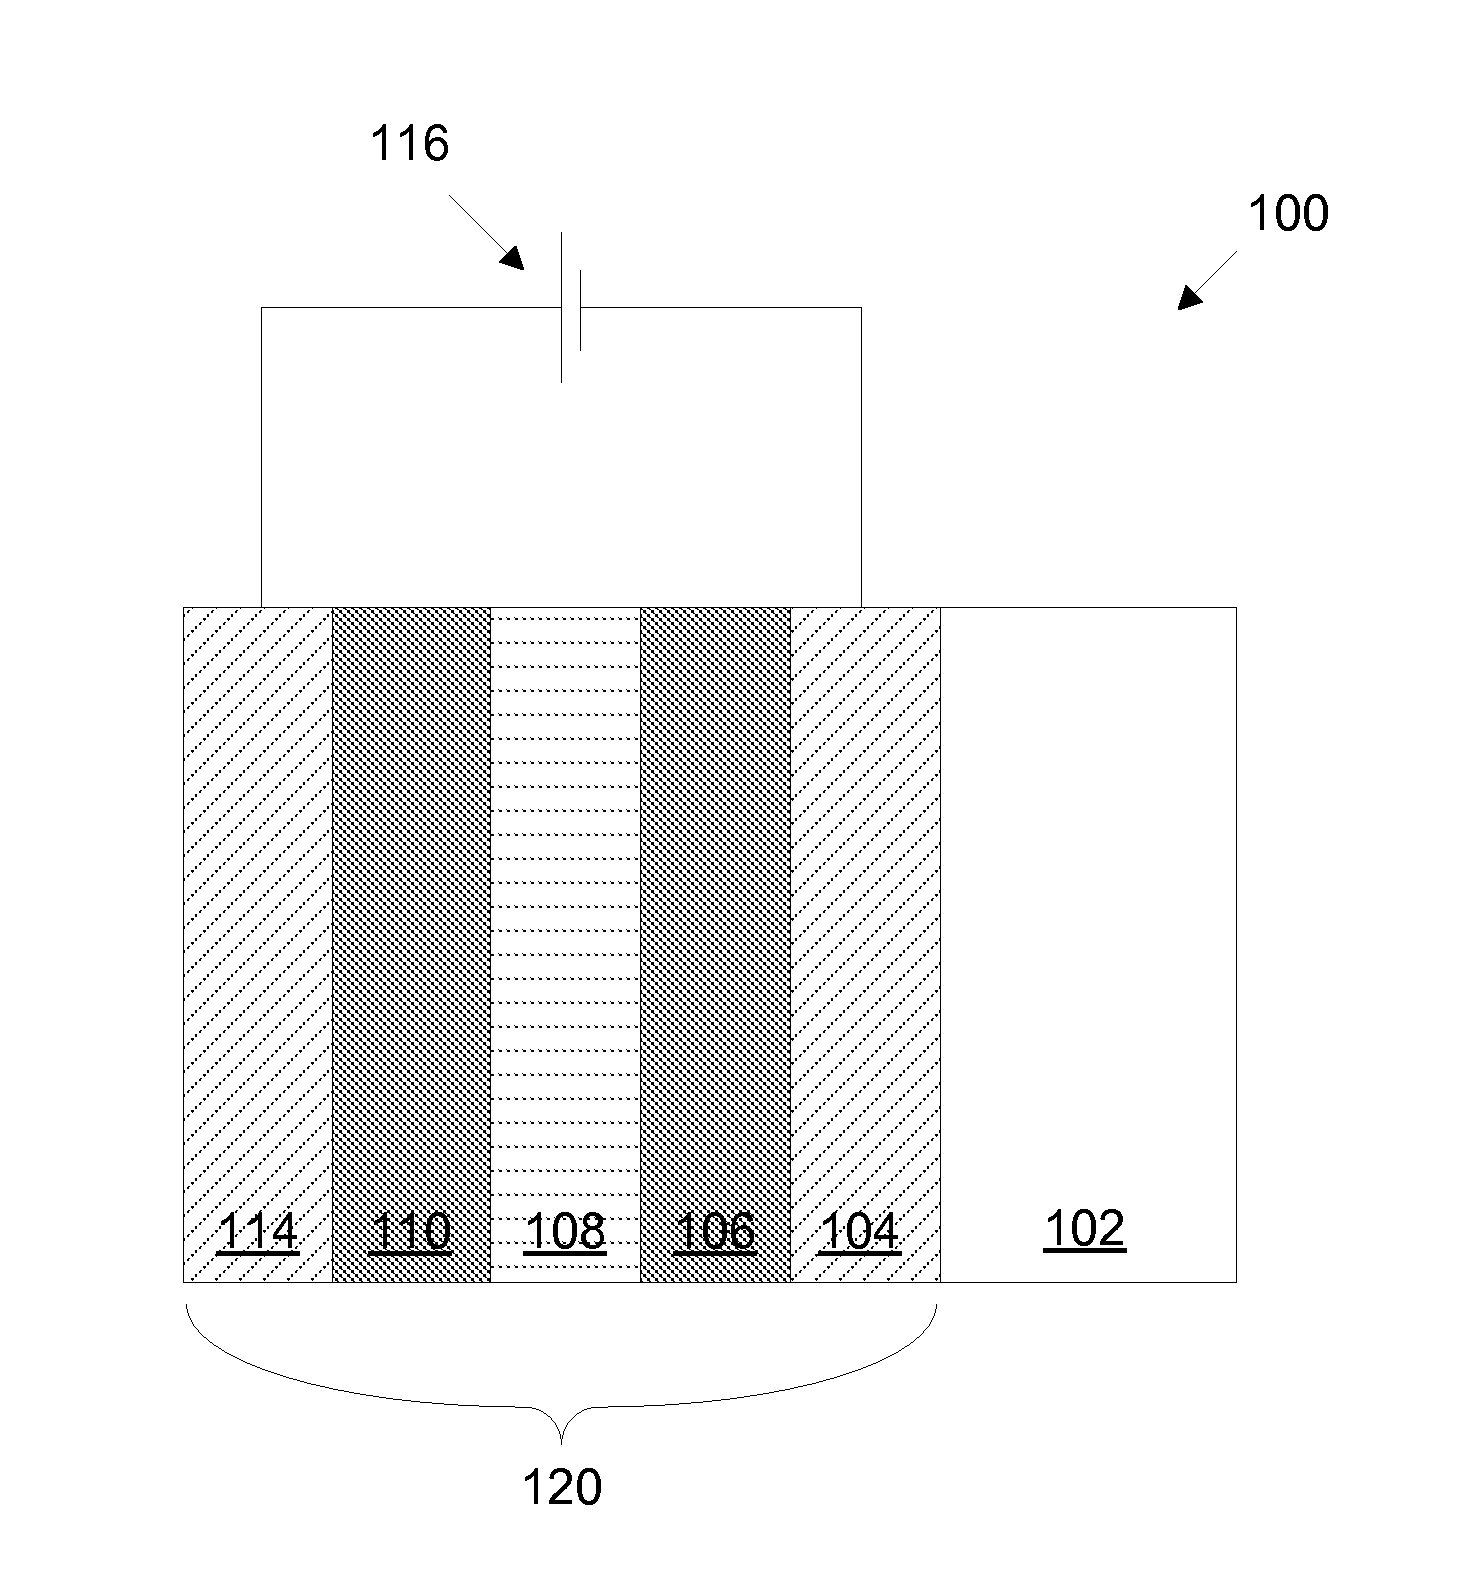 Fabrication of low defectivity electrochromic devices